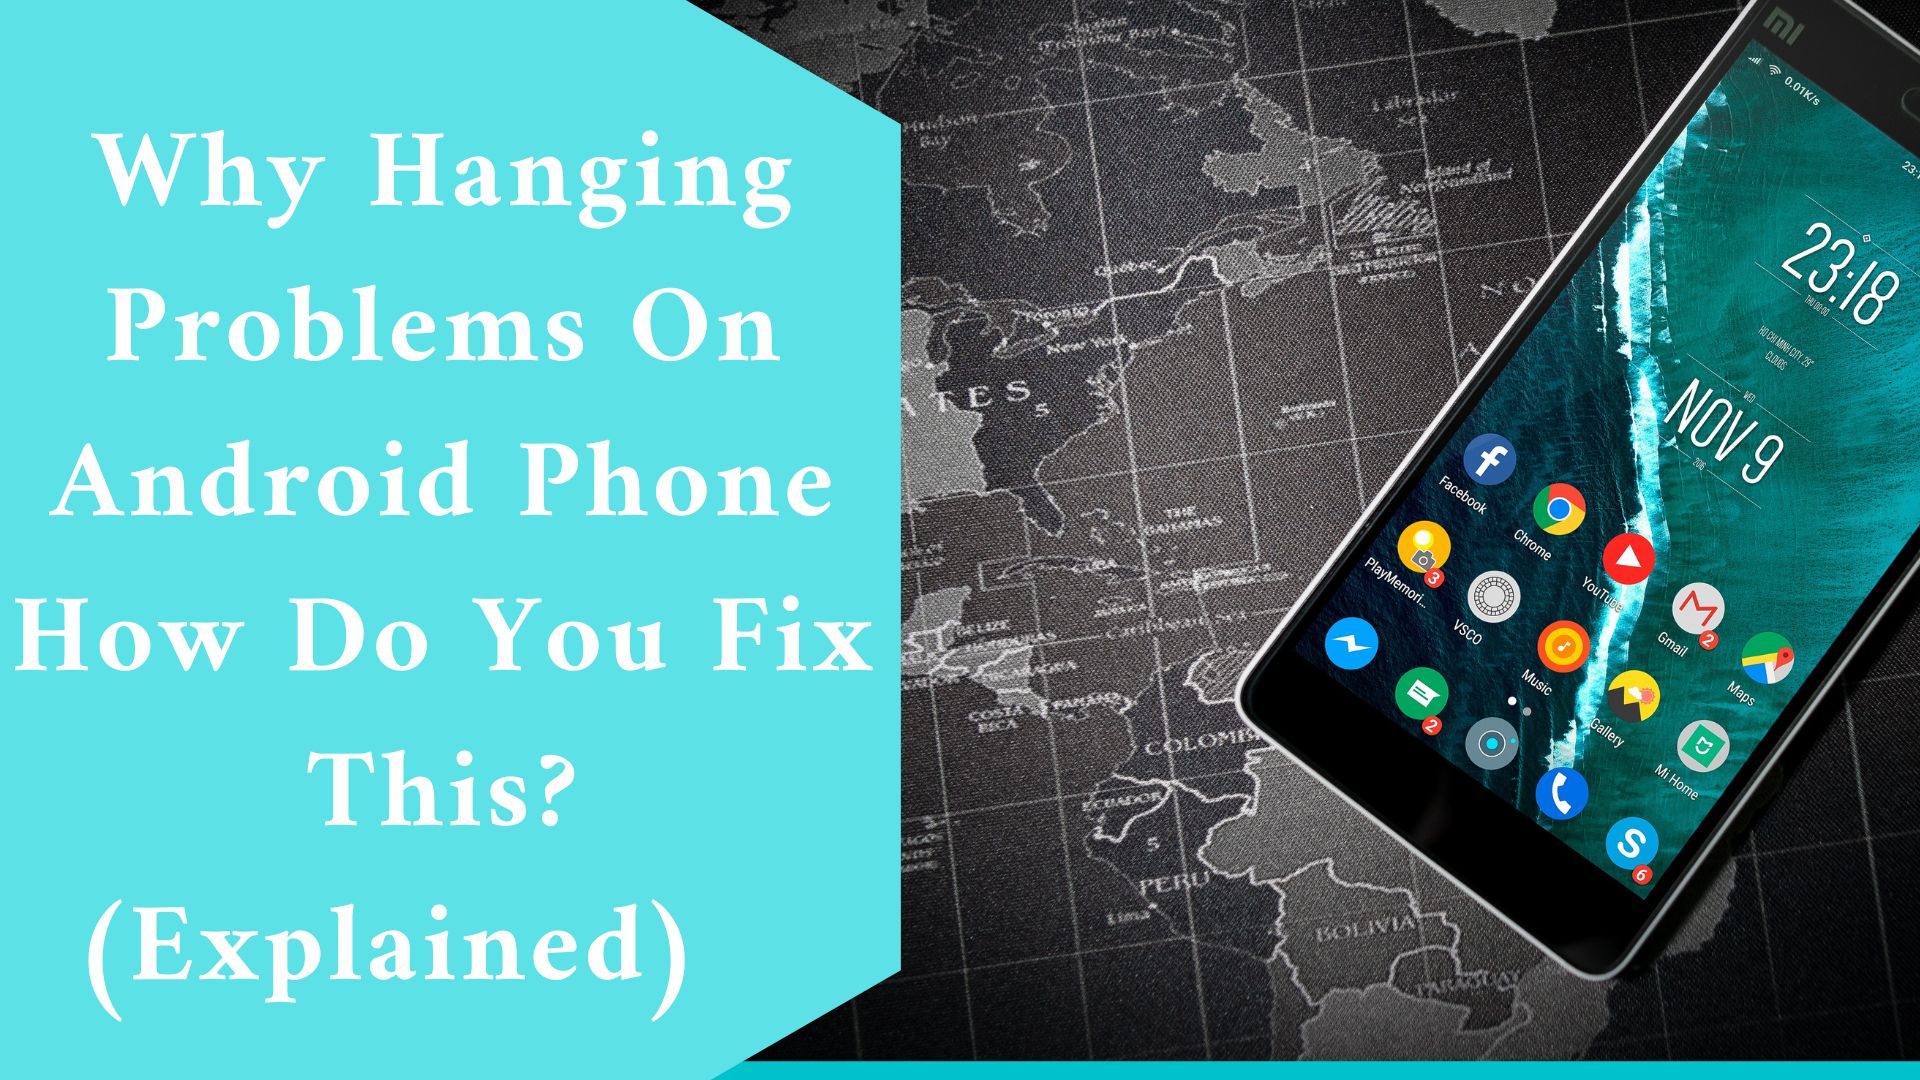 Why Hanging Problems On Android Phone How Do You Fix This? (Explained)